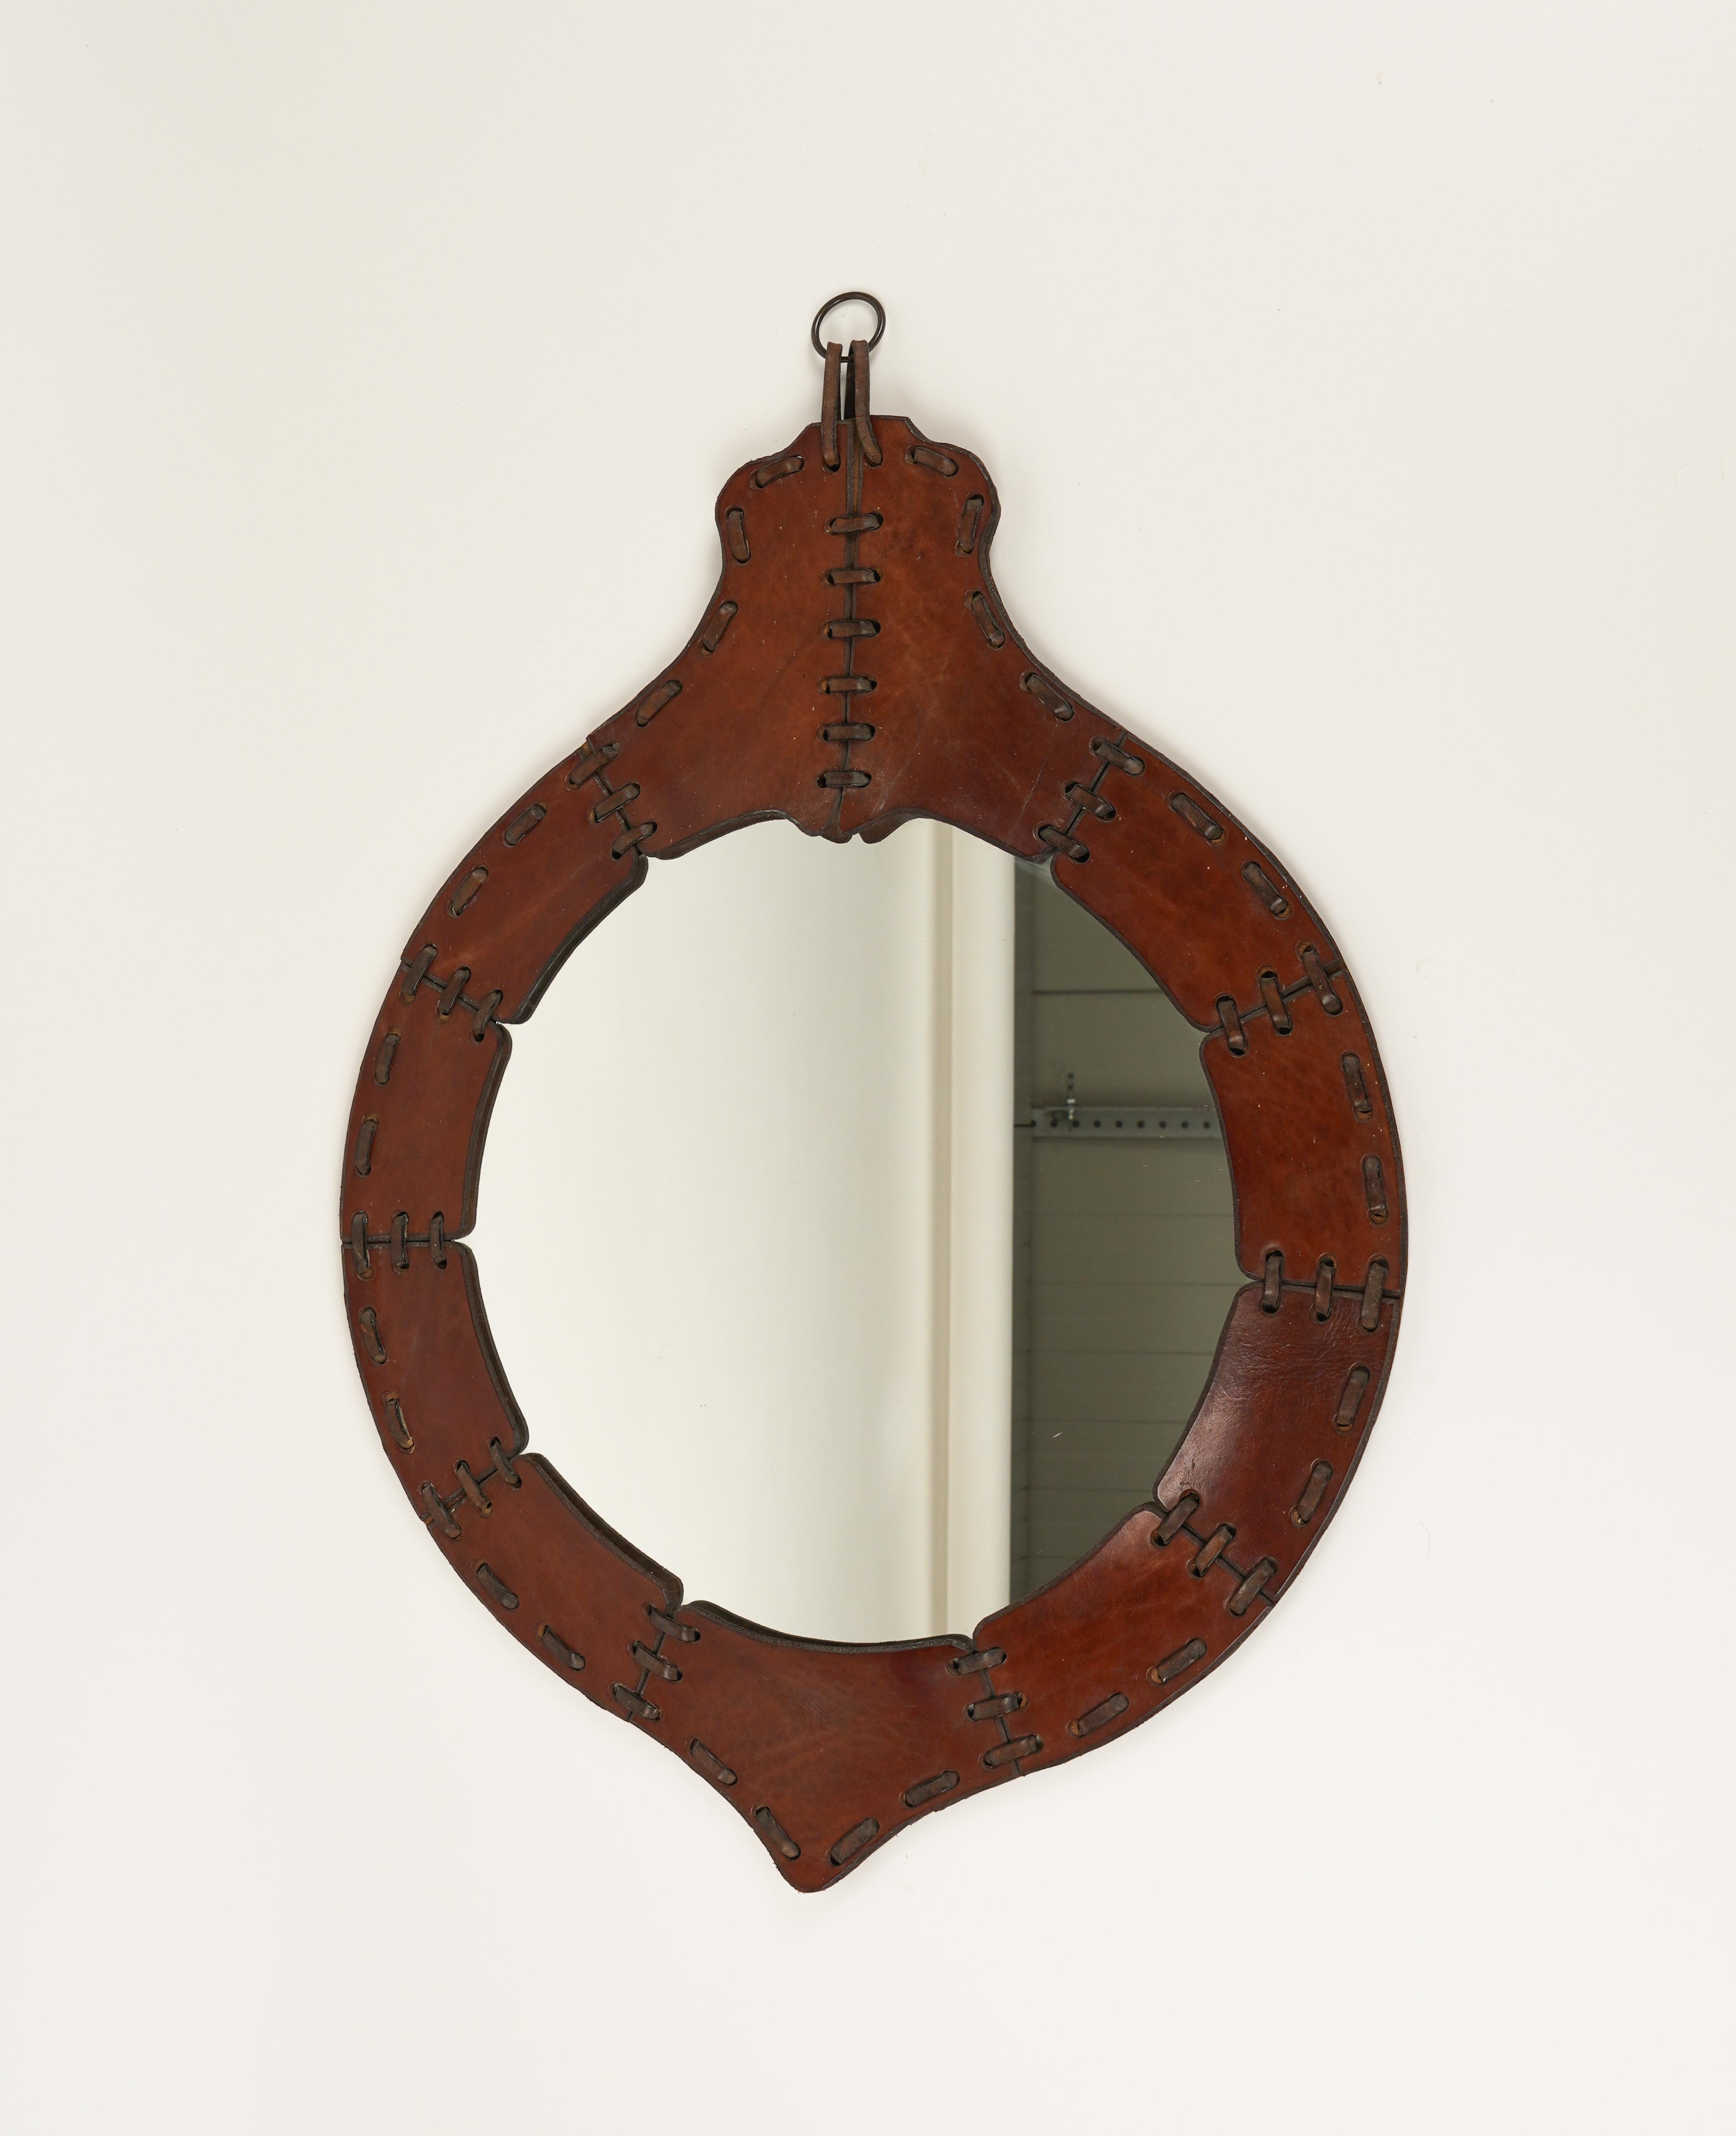 Midcentury Teardrop Wall Mirror in Leather, Italy 1960s For Sale 1